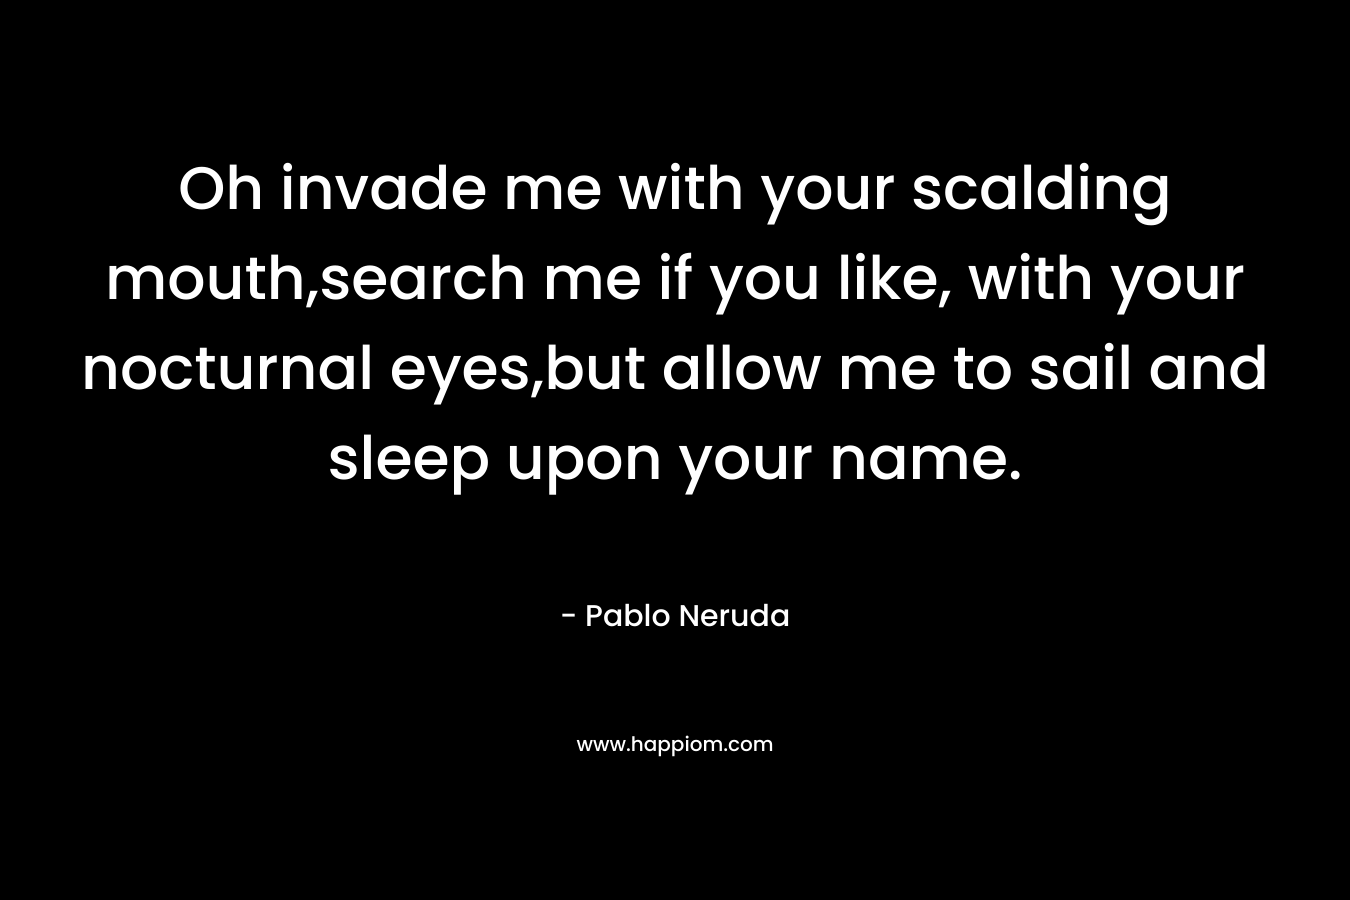 Oh invade me with your scalding mouth,search me if you like, with your nocturnal eyes,but allow me to sail and sleep upon your name.